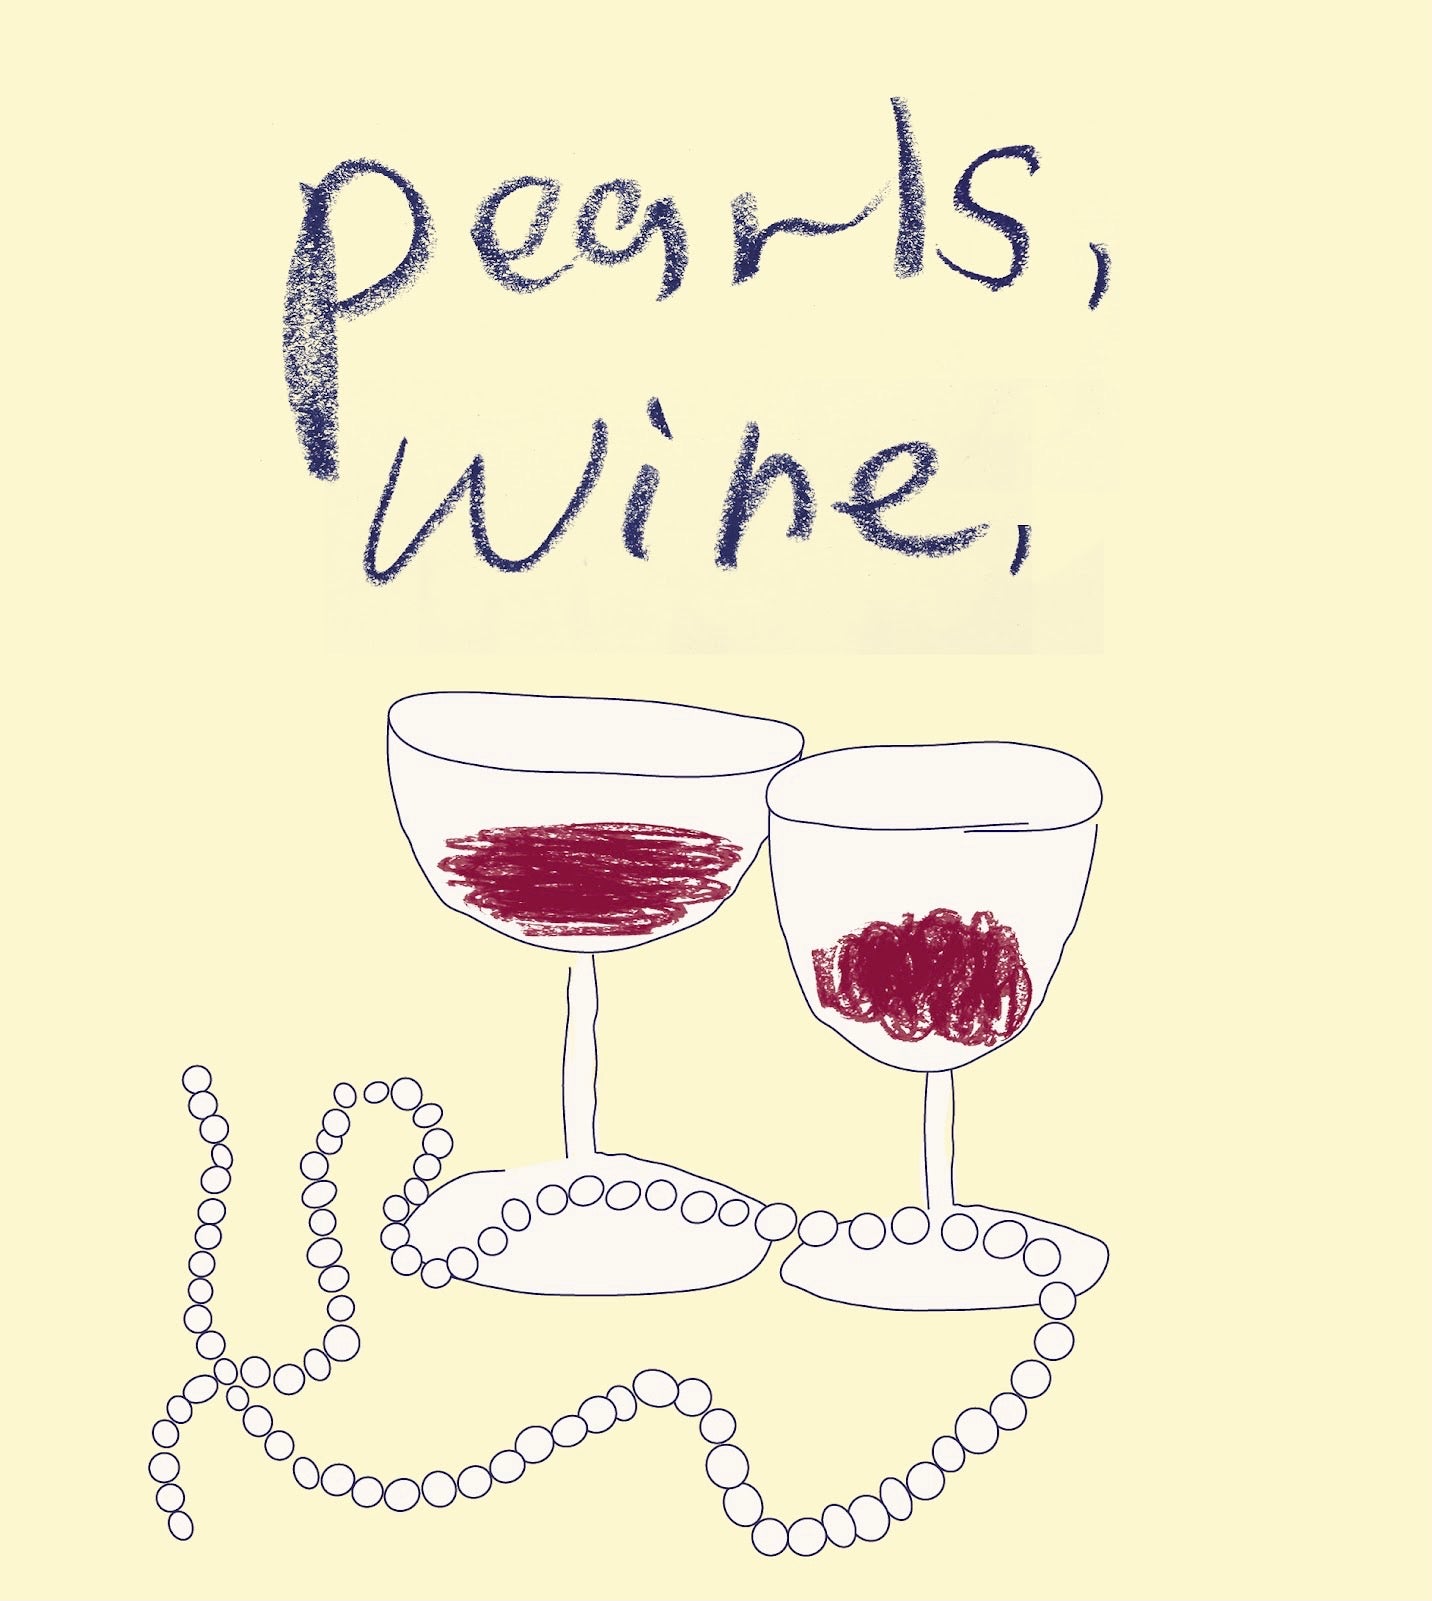 Pearls and Wine